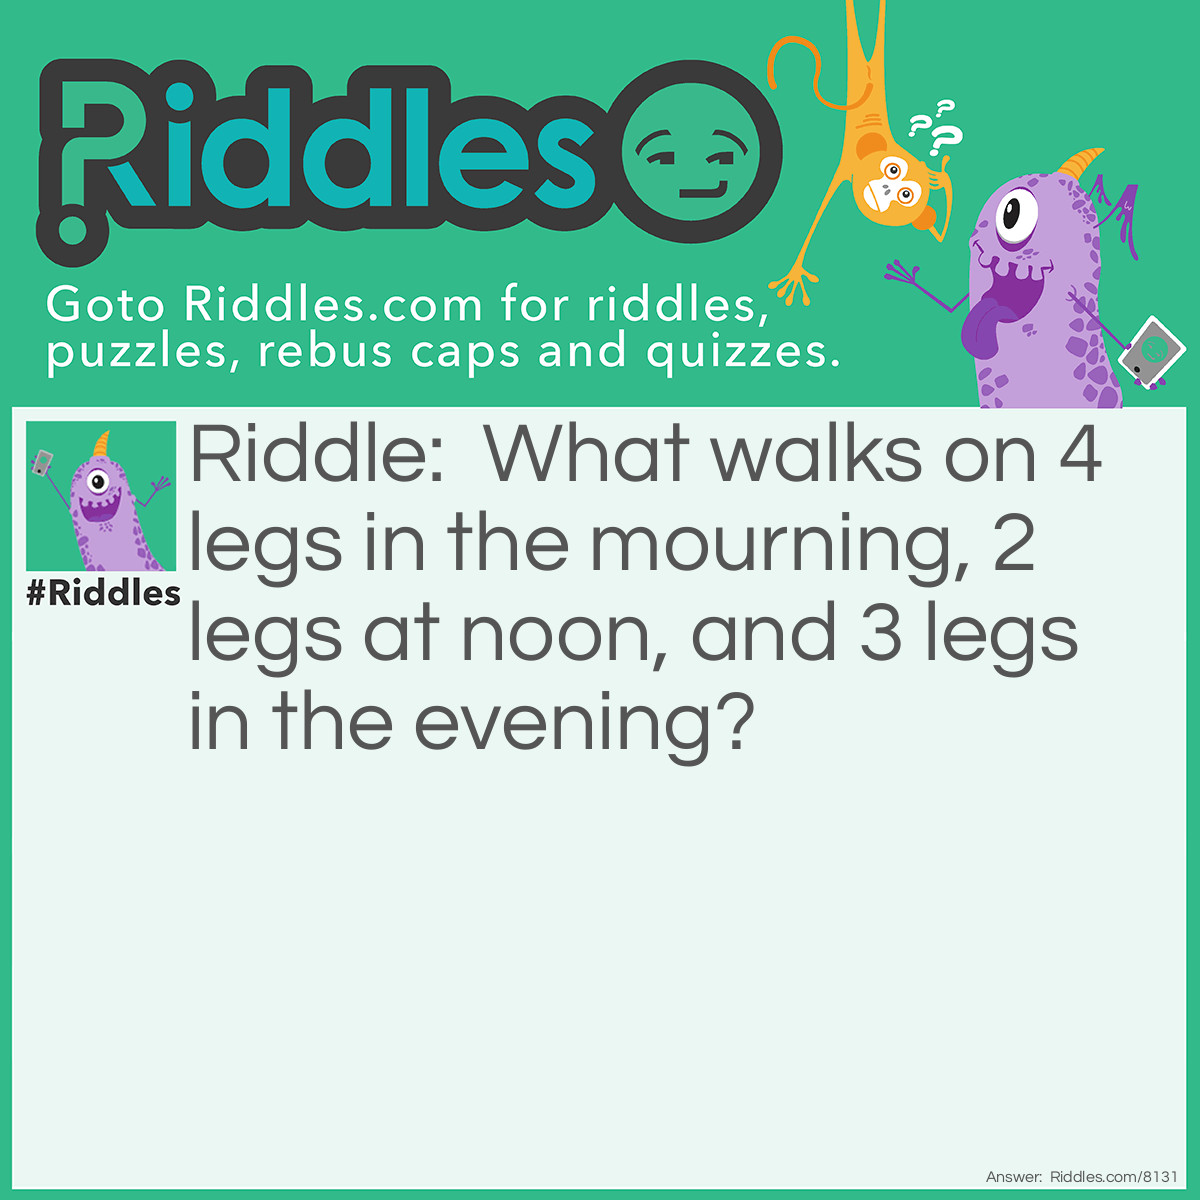 Riddle: What walks on 4 legs in the mourning, 2 legs at noon, and 3 legs in the evening? Answer: A human.